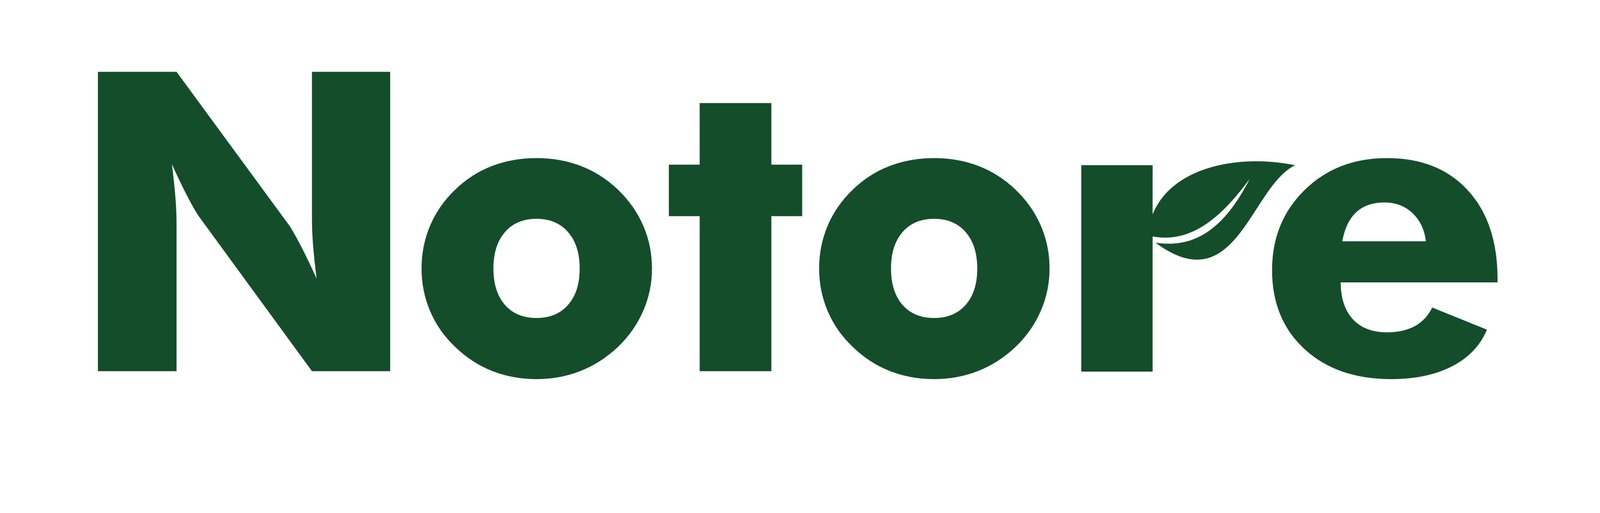 Notore Records N2.9 Billion Operating Profit in First Quarter